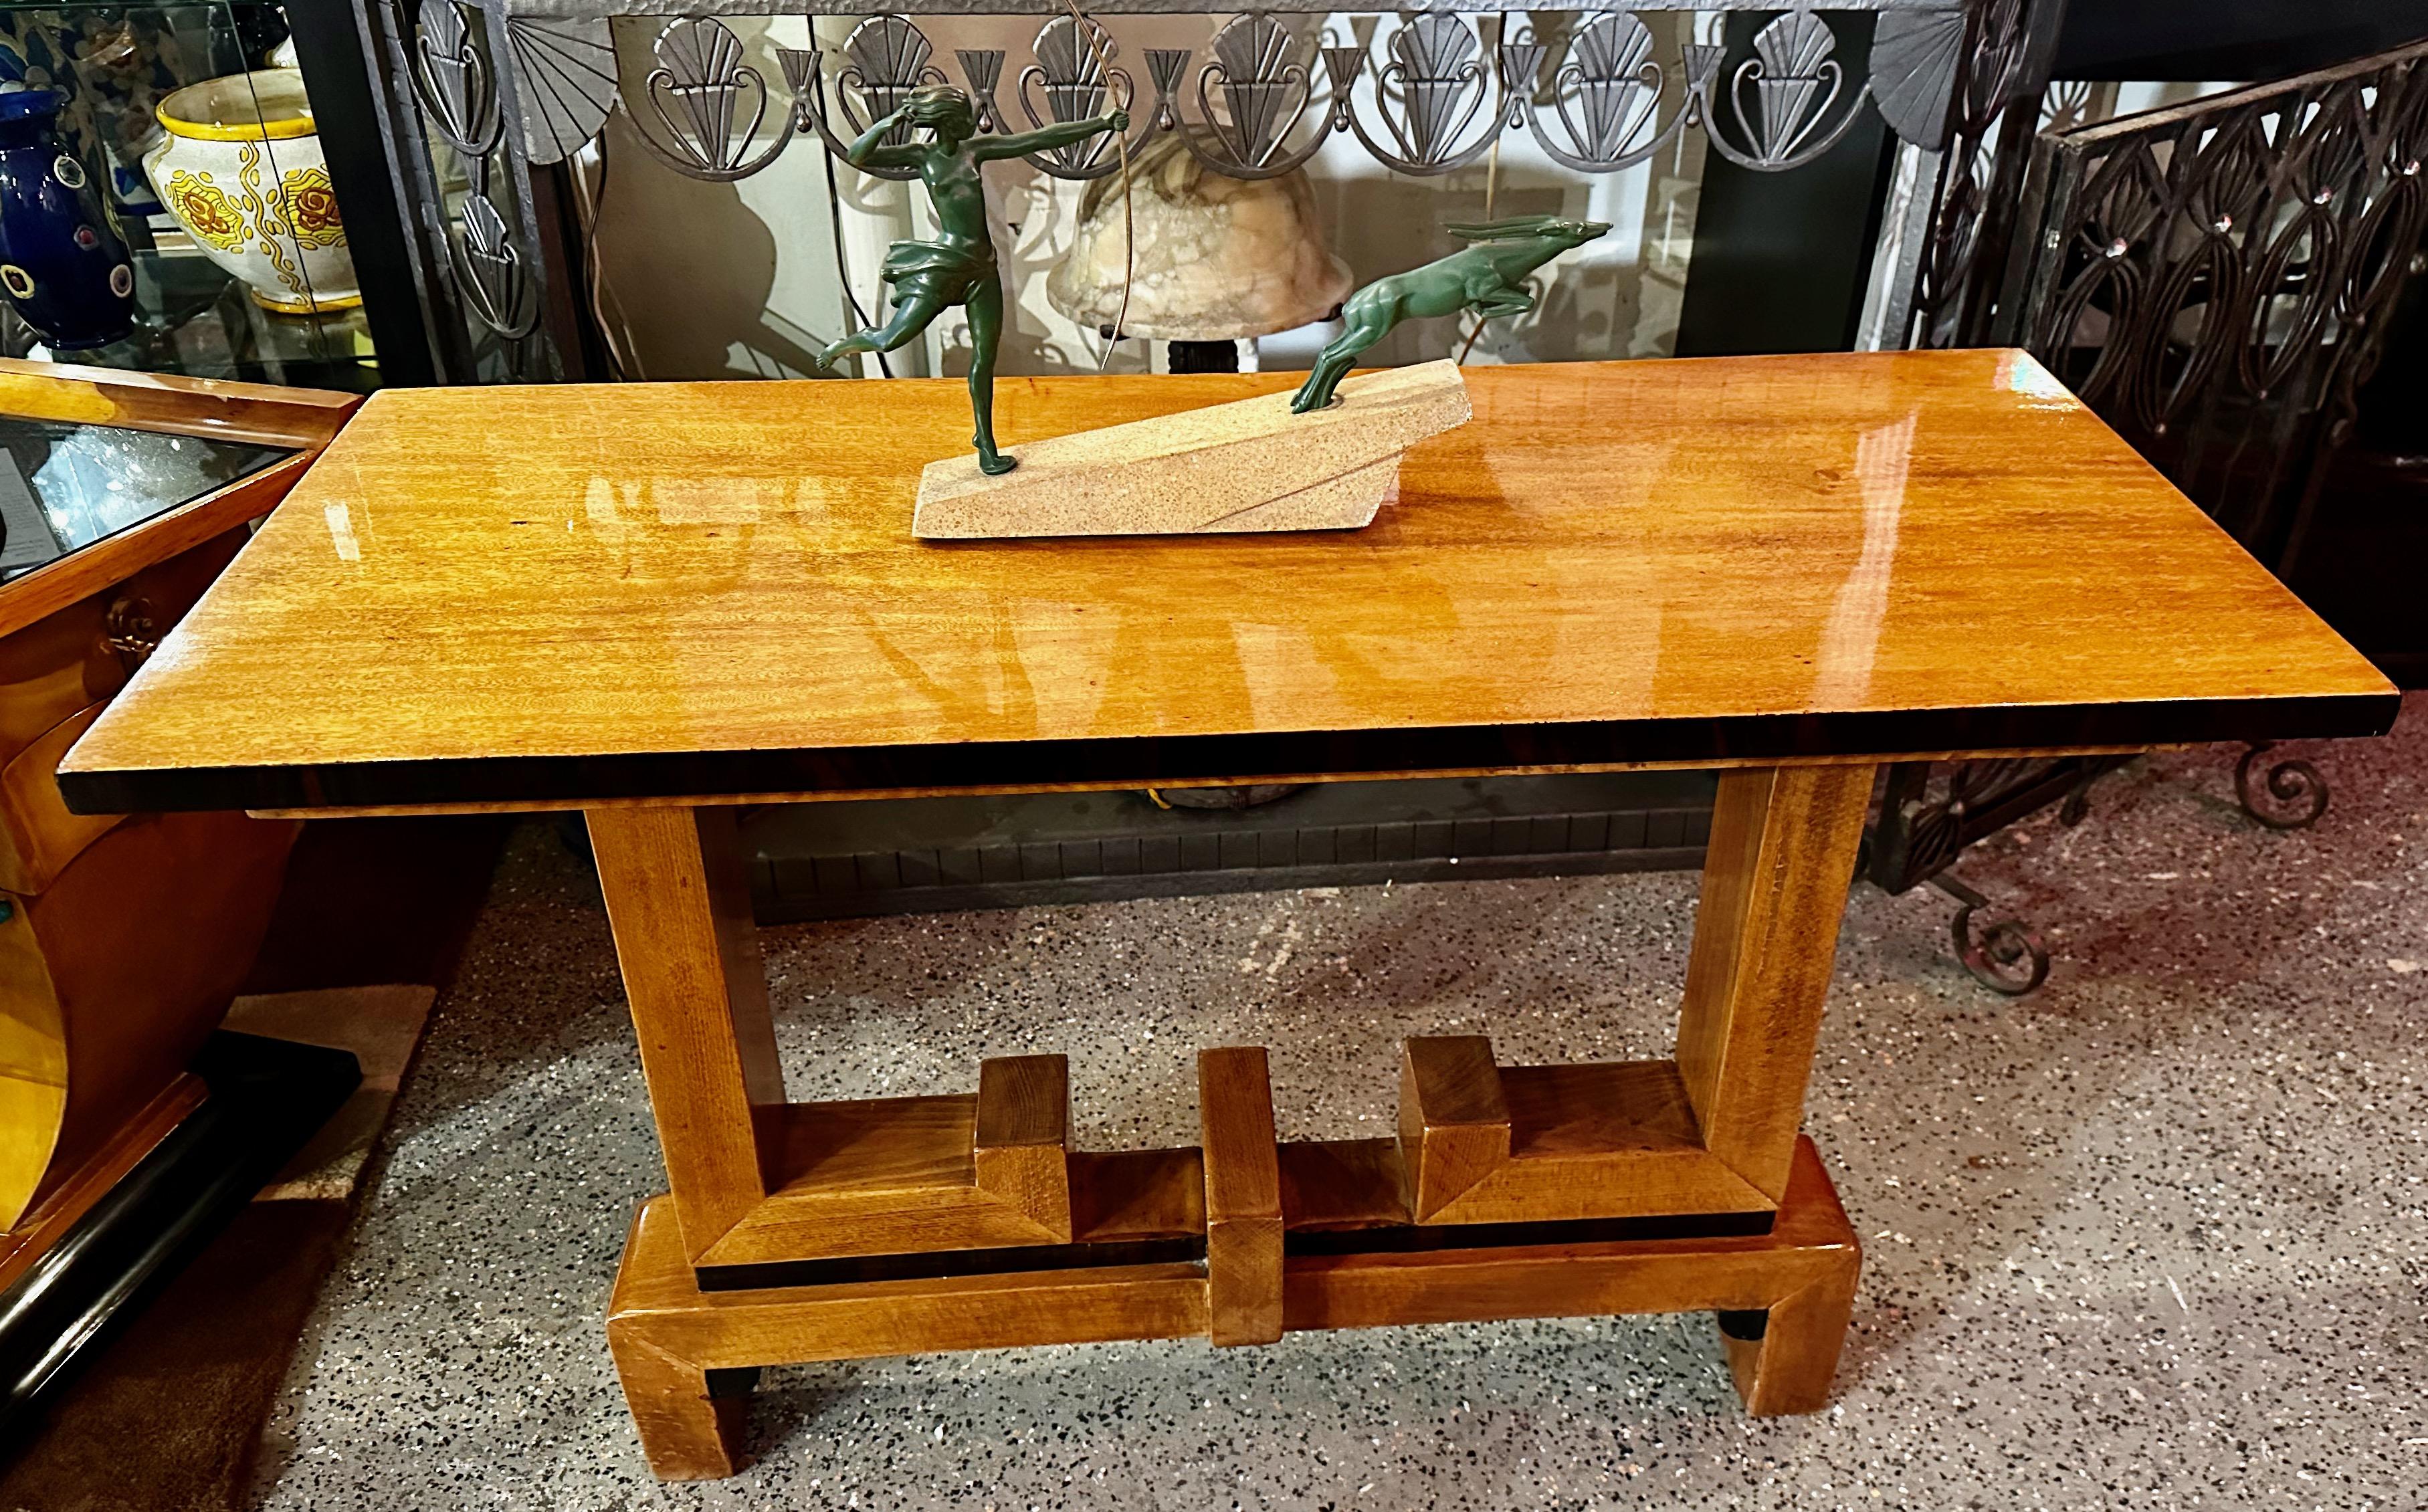 Custom French-style two-tone wood console. Dark painted edges and heavily grained contrasting medium honey blonde wood that is highly figured make this especially rich looking. This is a terrific and useful size. The base has a great sculpted